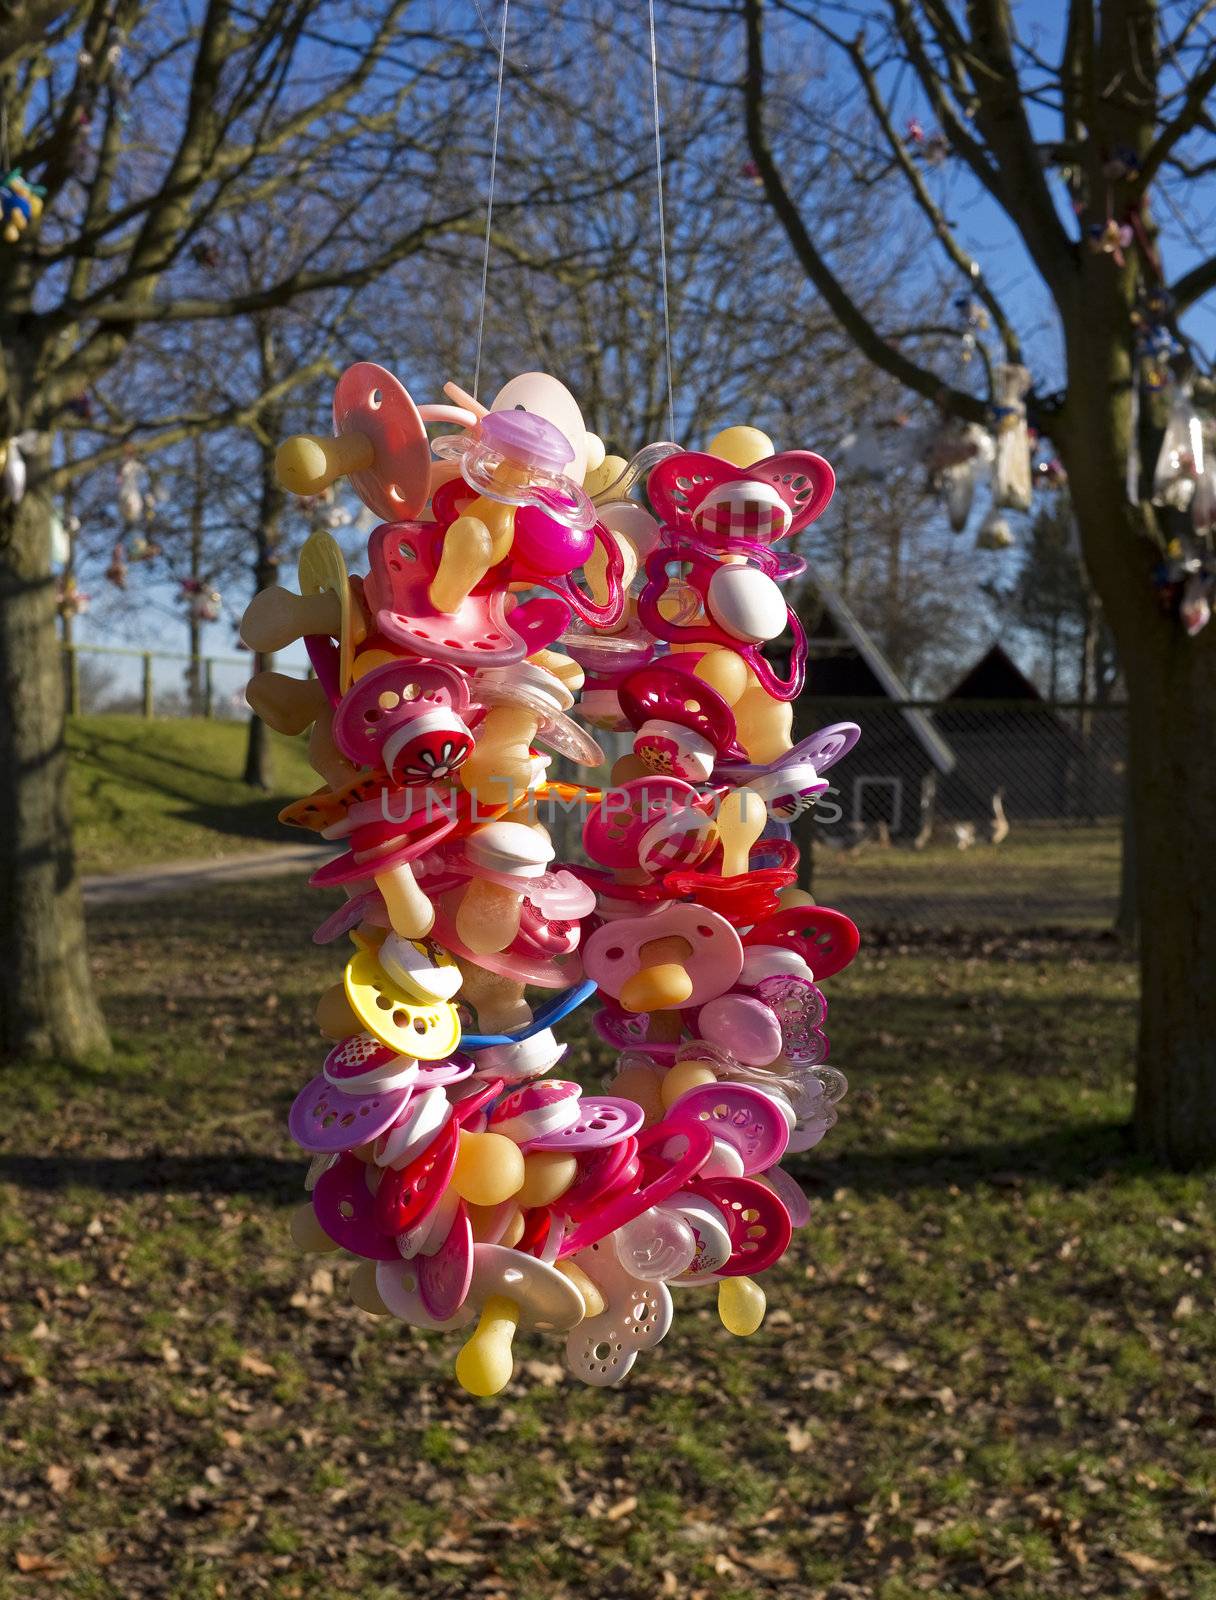 Colorful pacifiers hanged in a tree in the park by small childildren from a day nursery trying to stop using them.